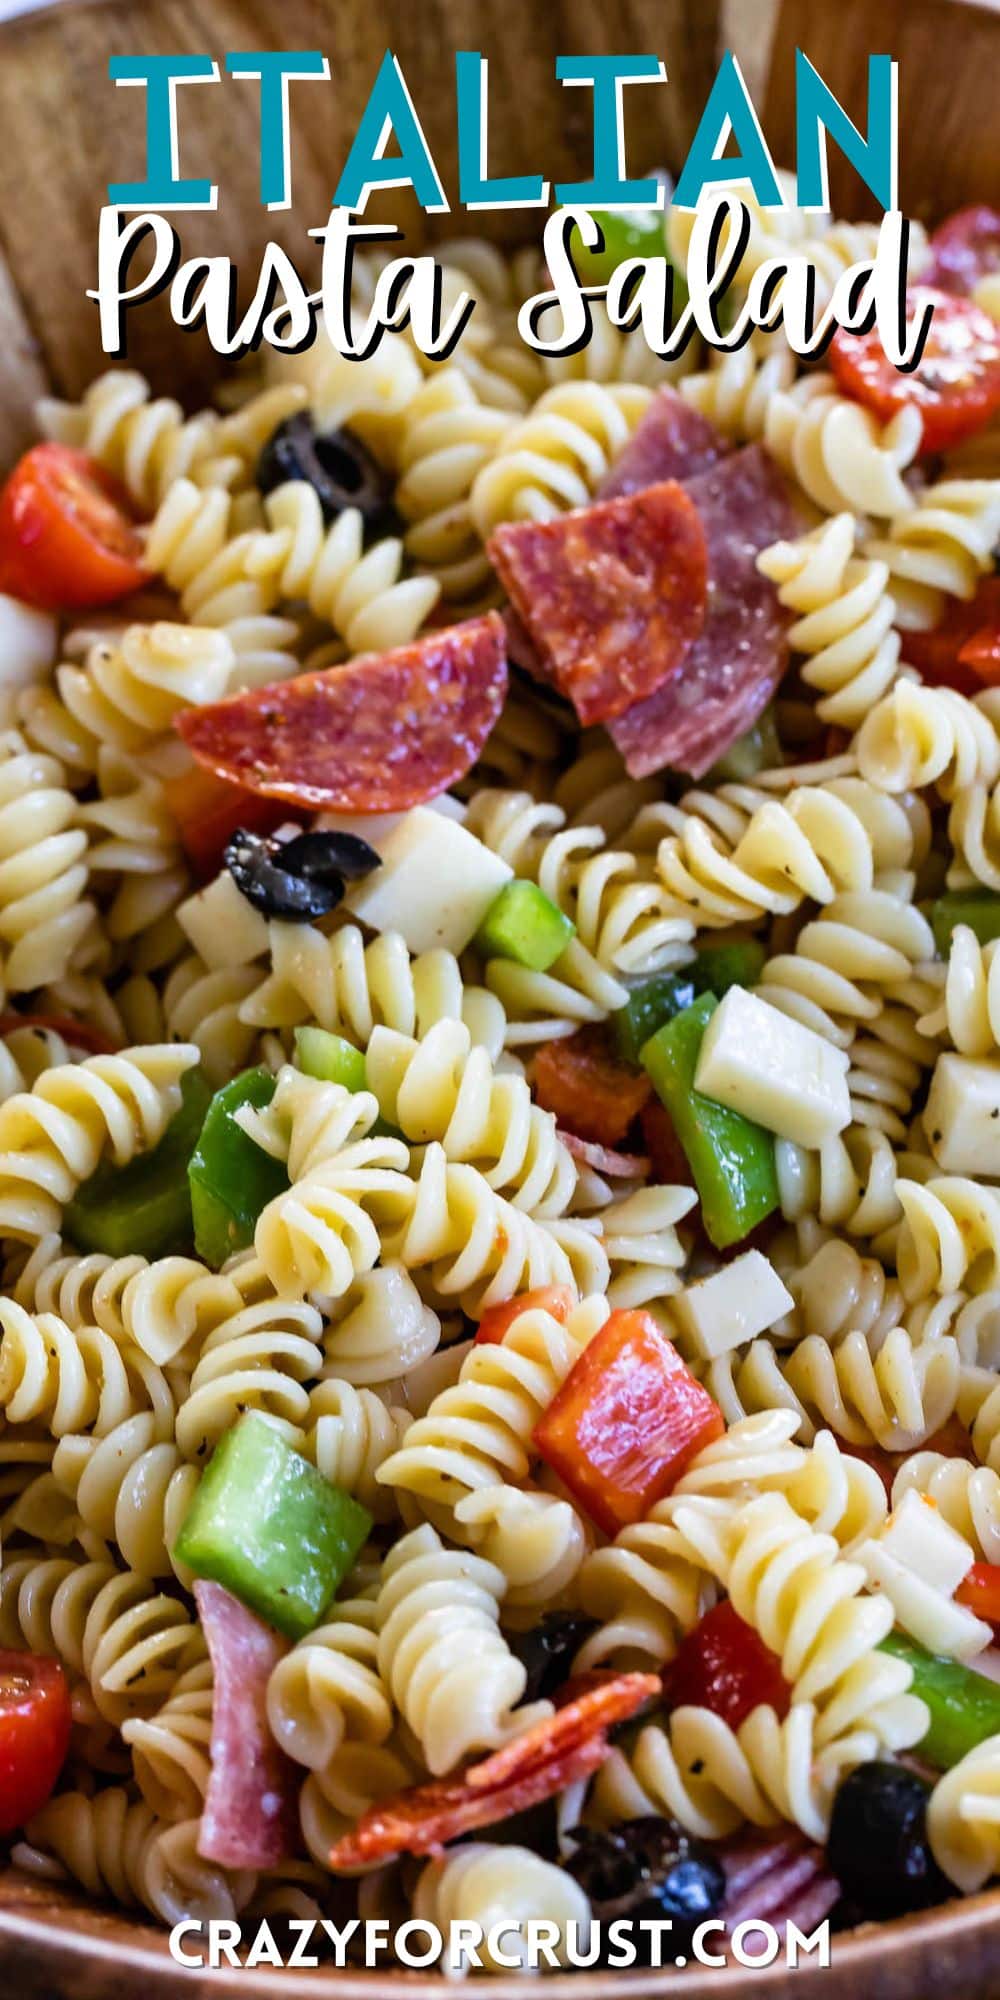 pasta and salami and other mix ins together in a wooden bowl with words on the image.